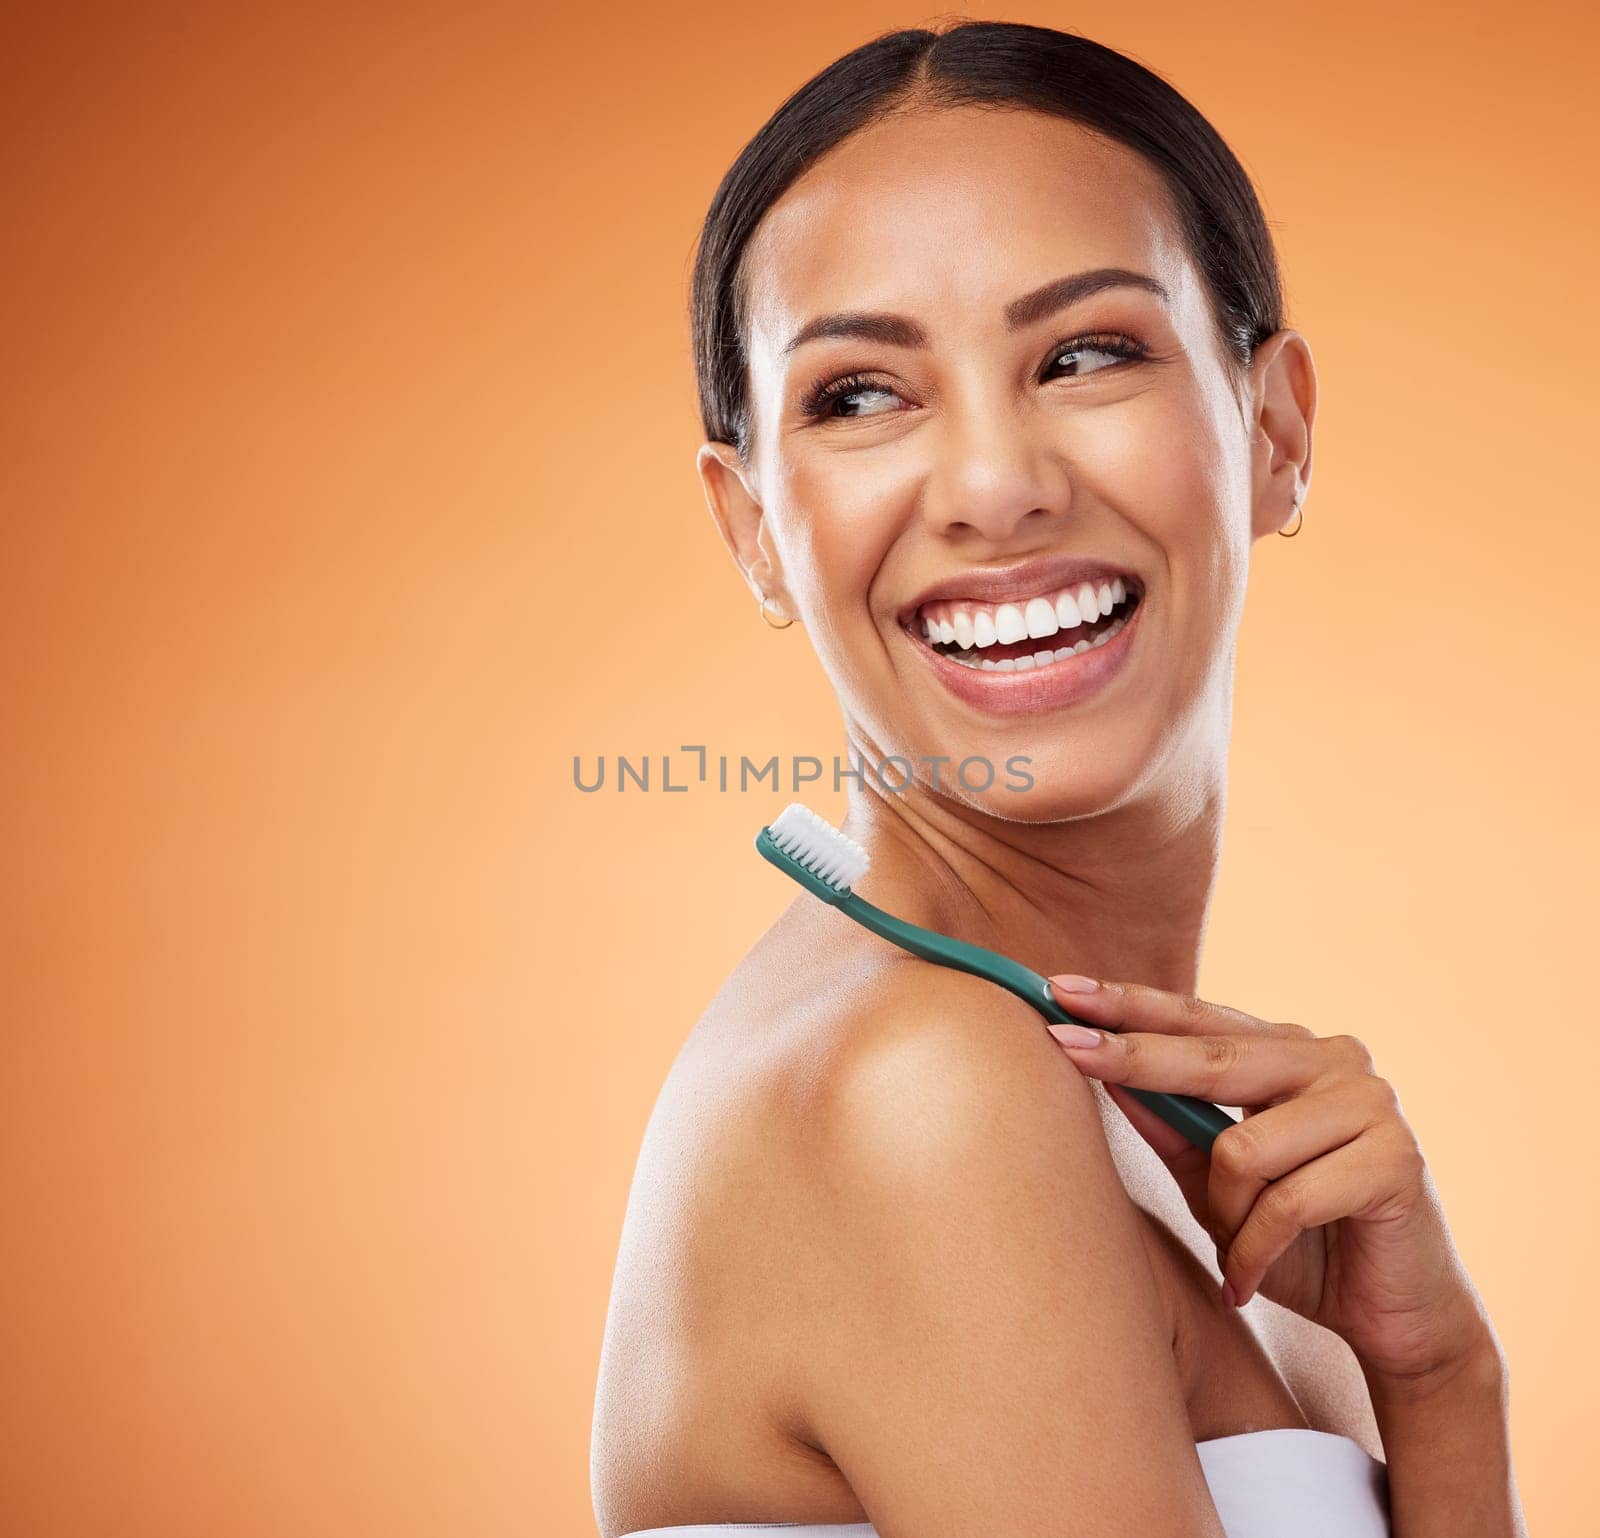 Toothbrush, dental care and woman with a smile in a studio with an orange background with mockup space. Healthy teeth, happy and girl model from Puerto Rico with mouth hygiene routine for oral health.